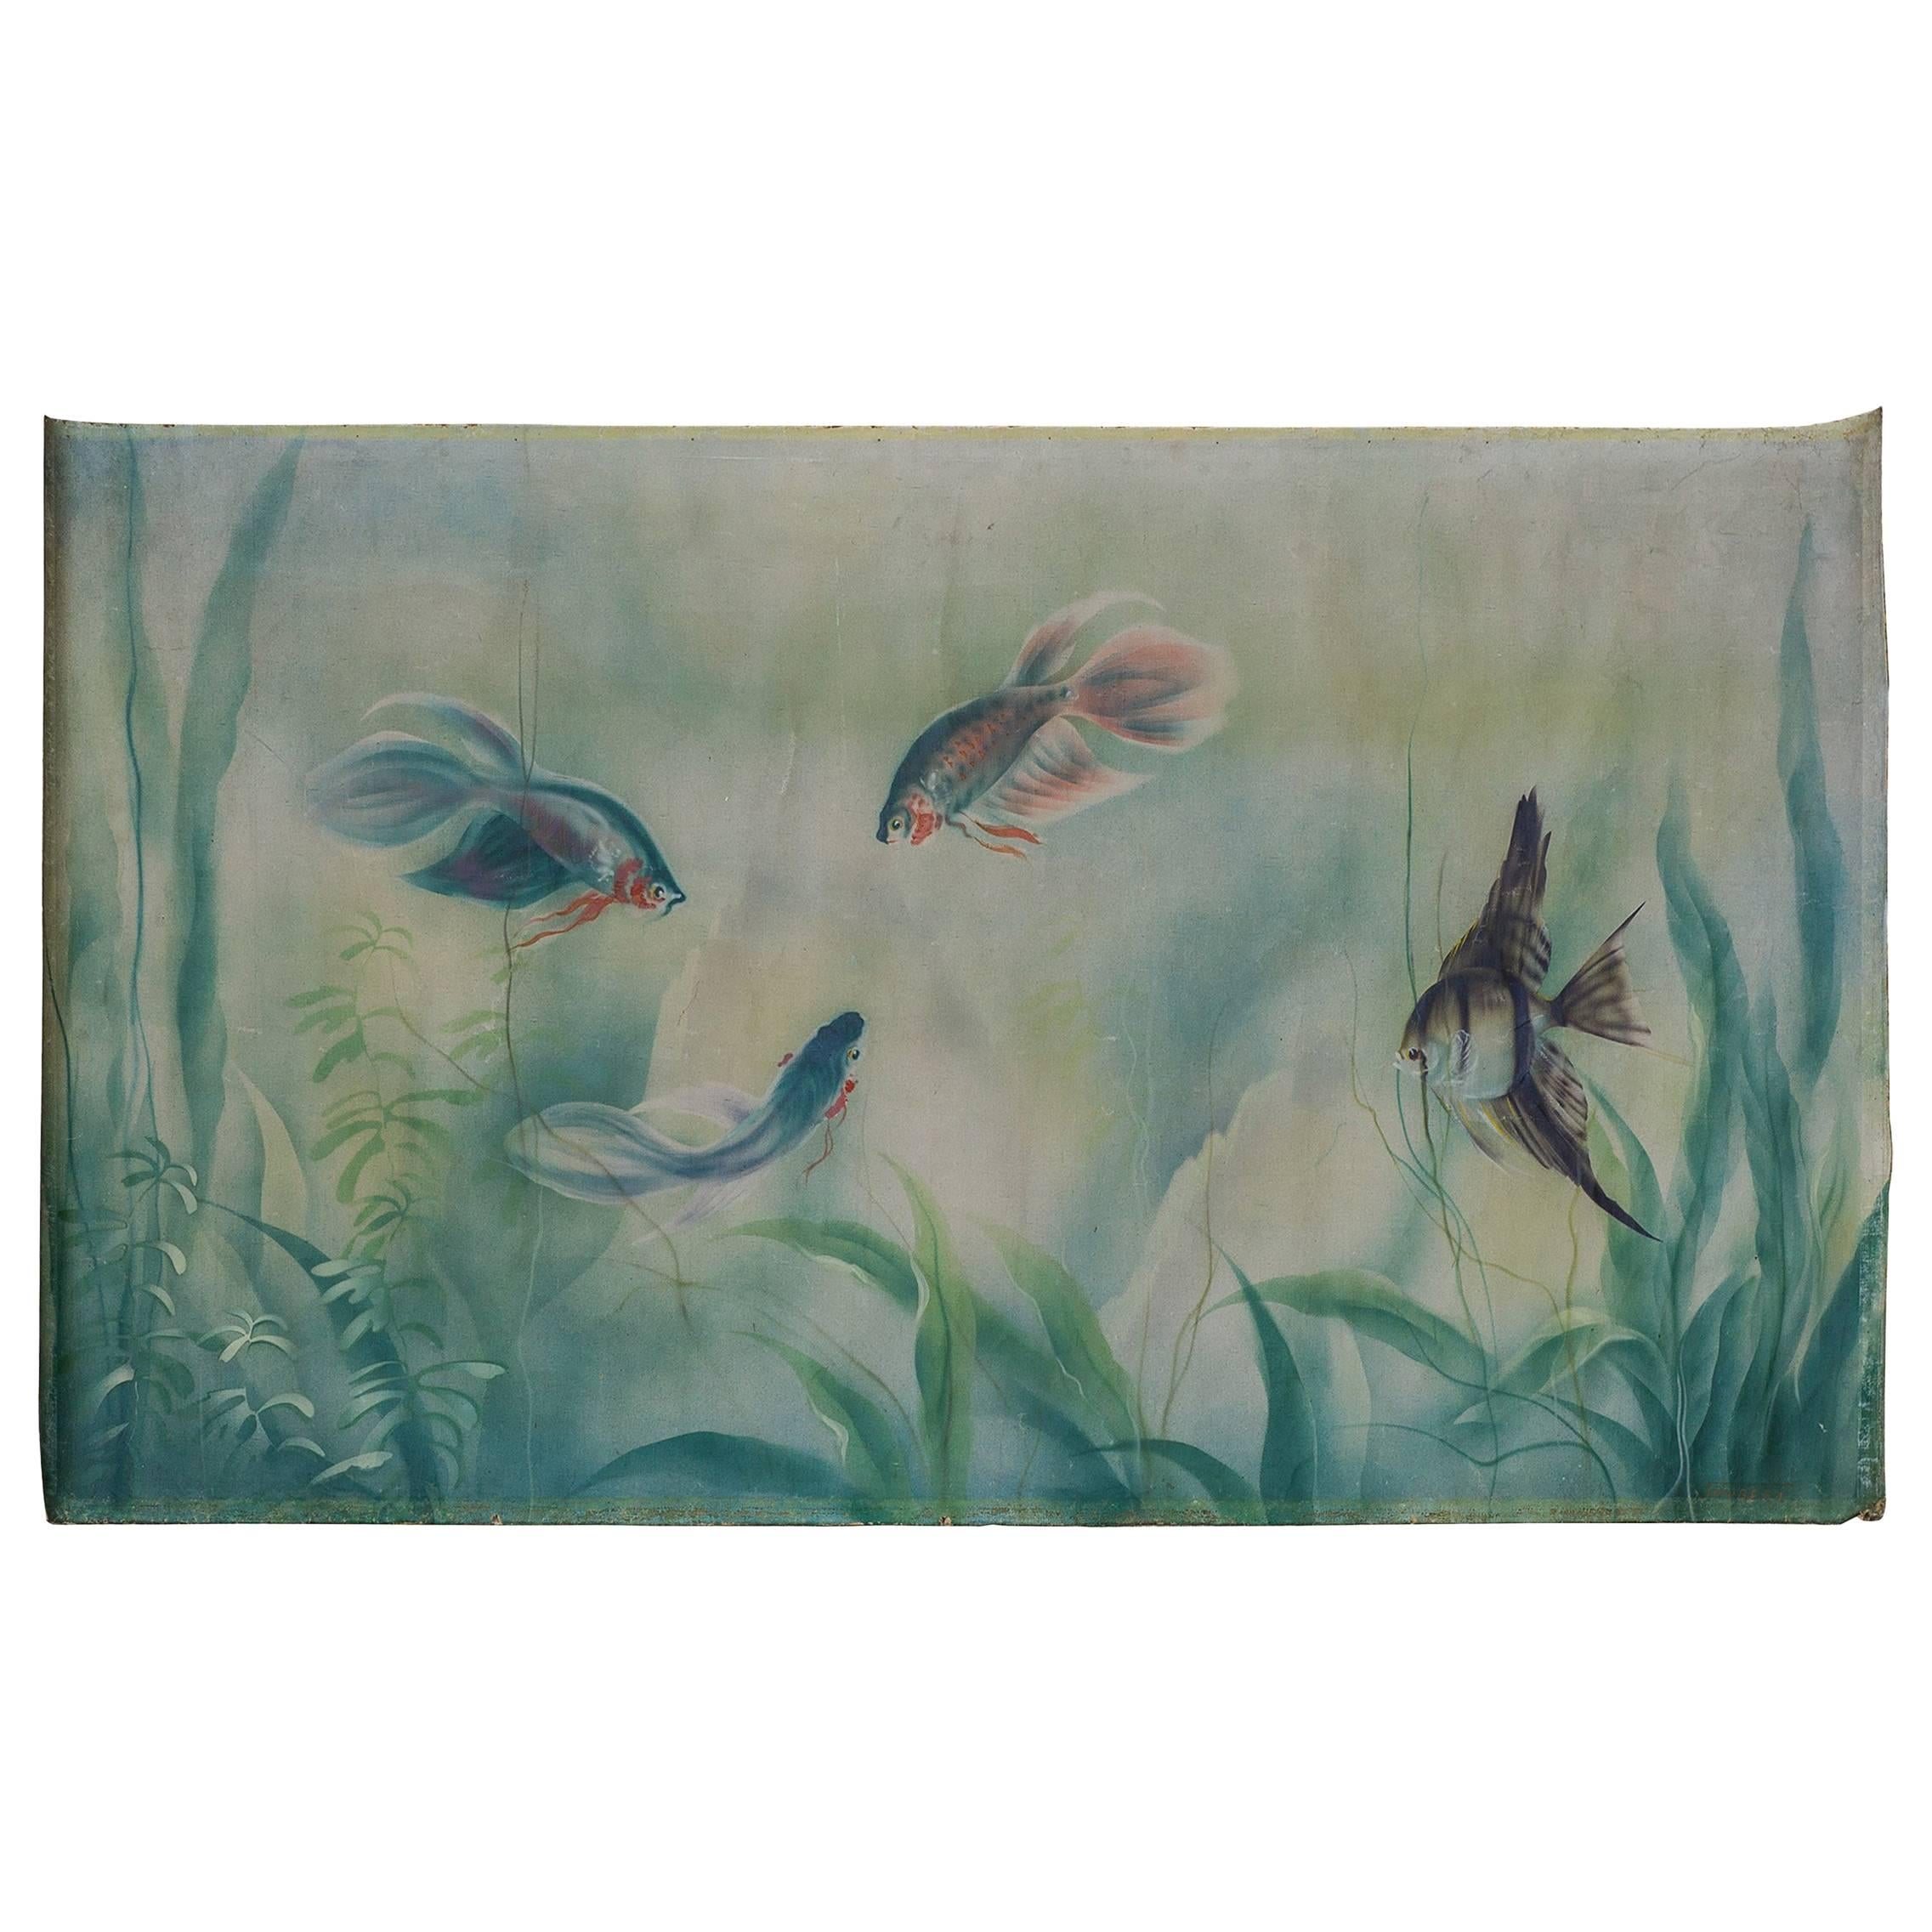  Marine Hand Painting with Fishes for a Beach House or a Bath For Sale